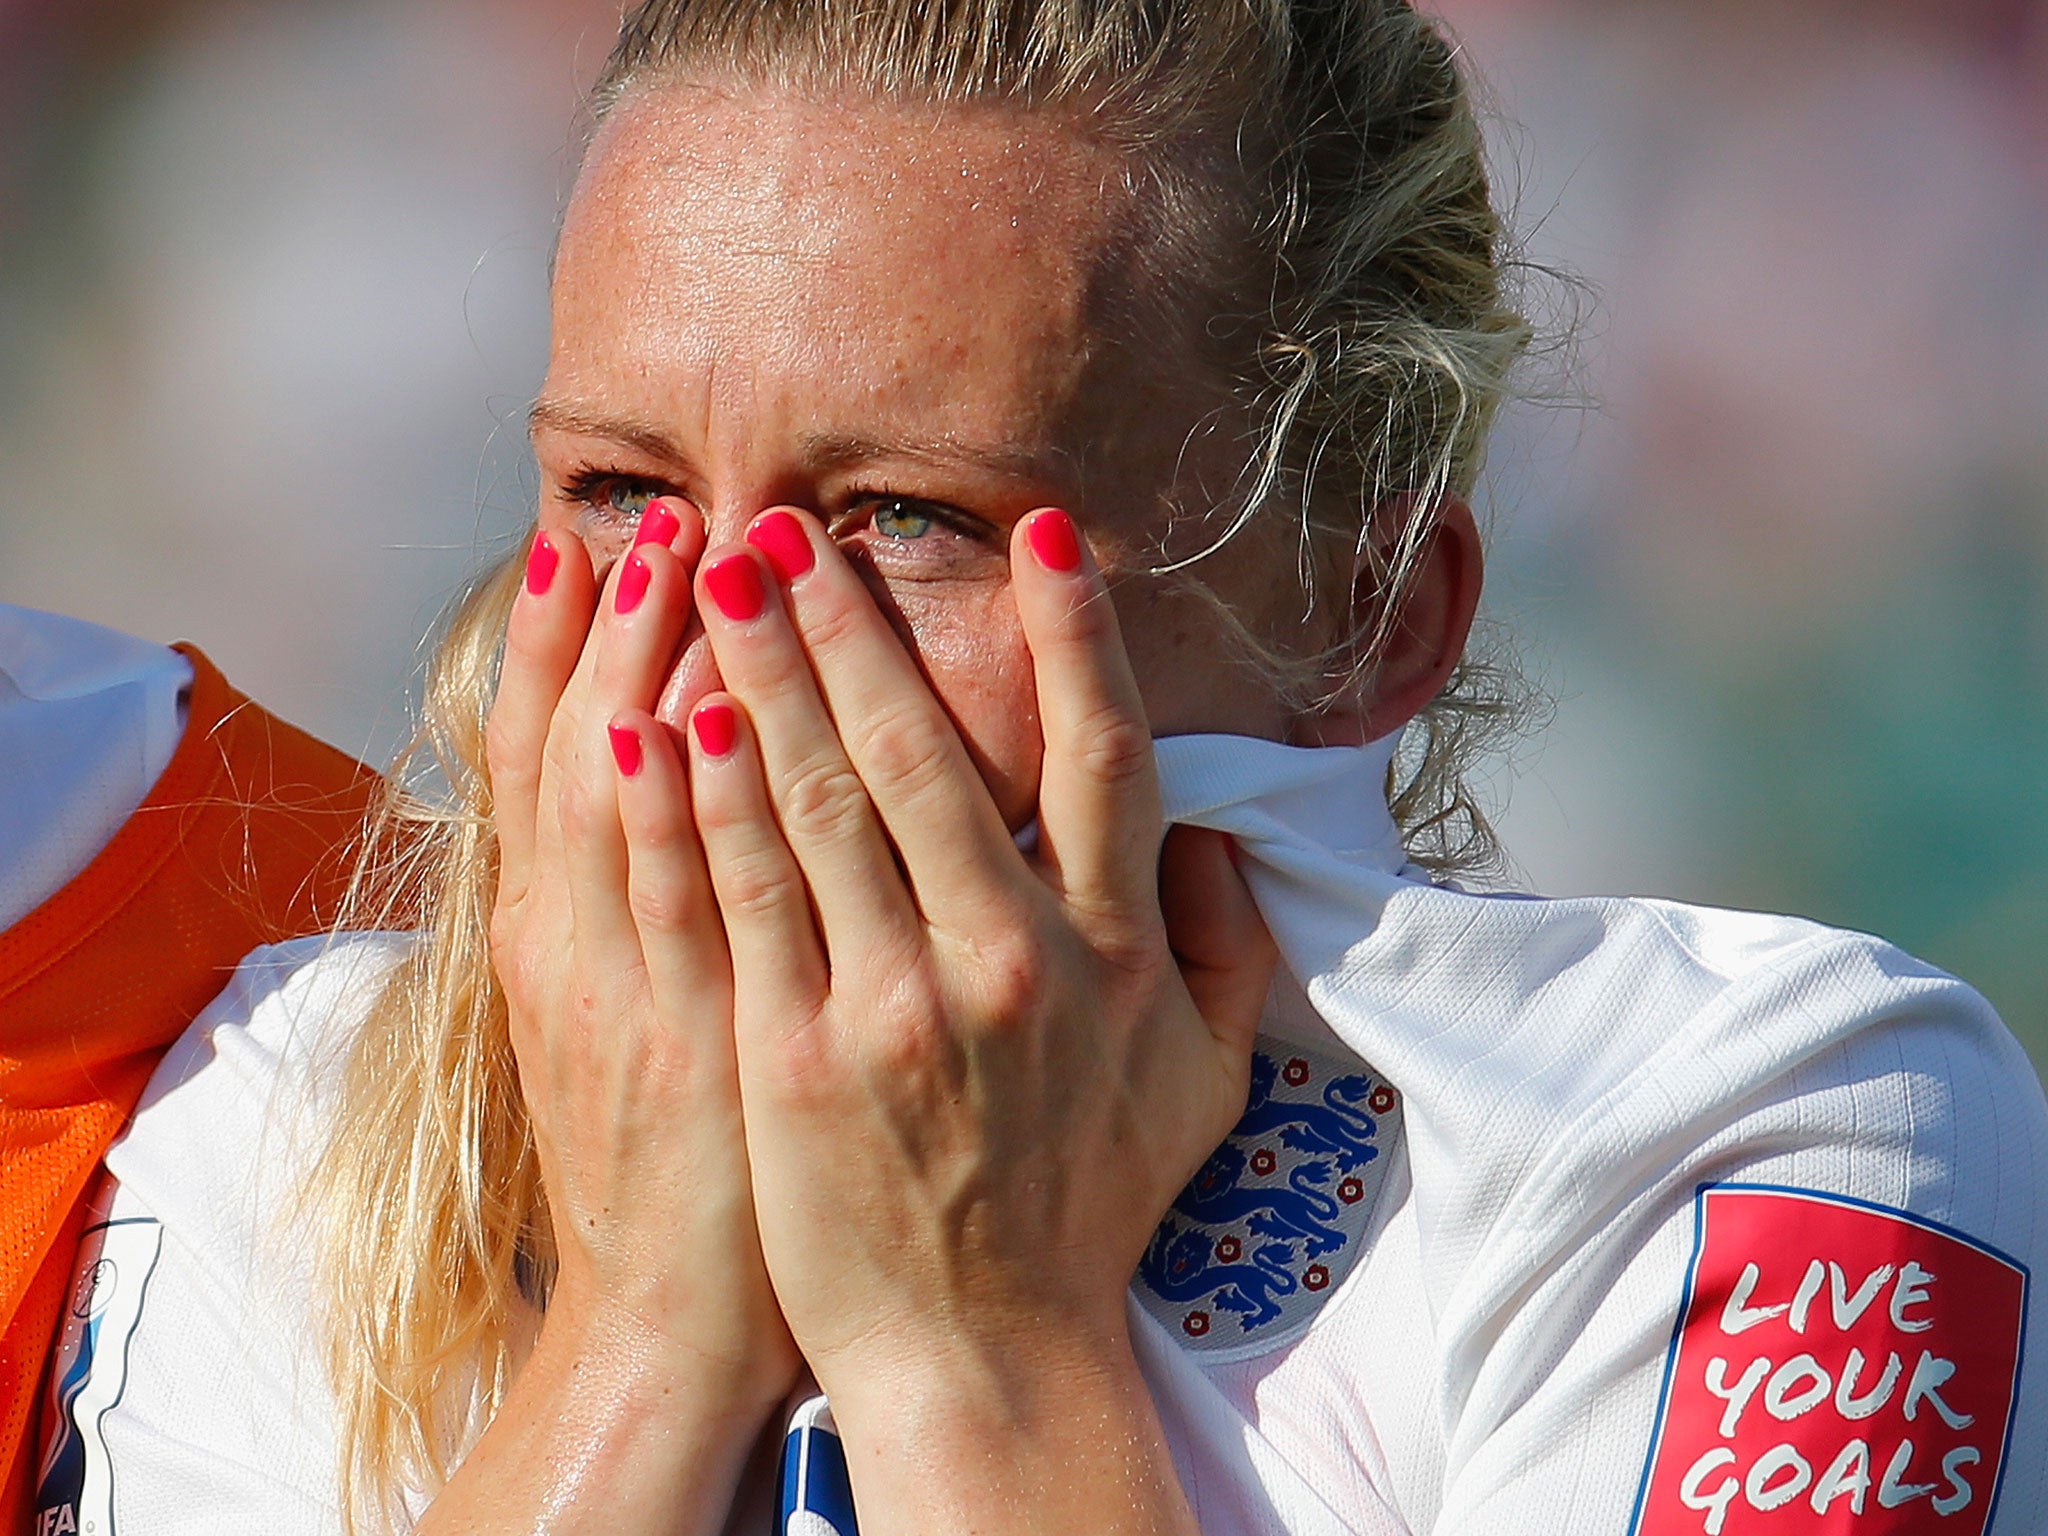 Laura Bassett after her own goal cost England women a chance to play in the World Cup final